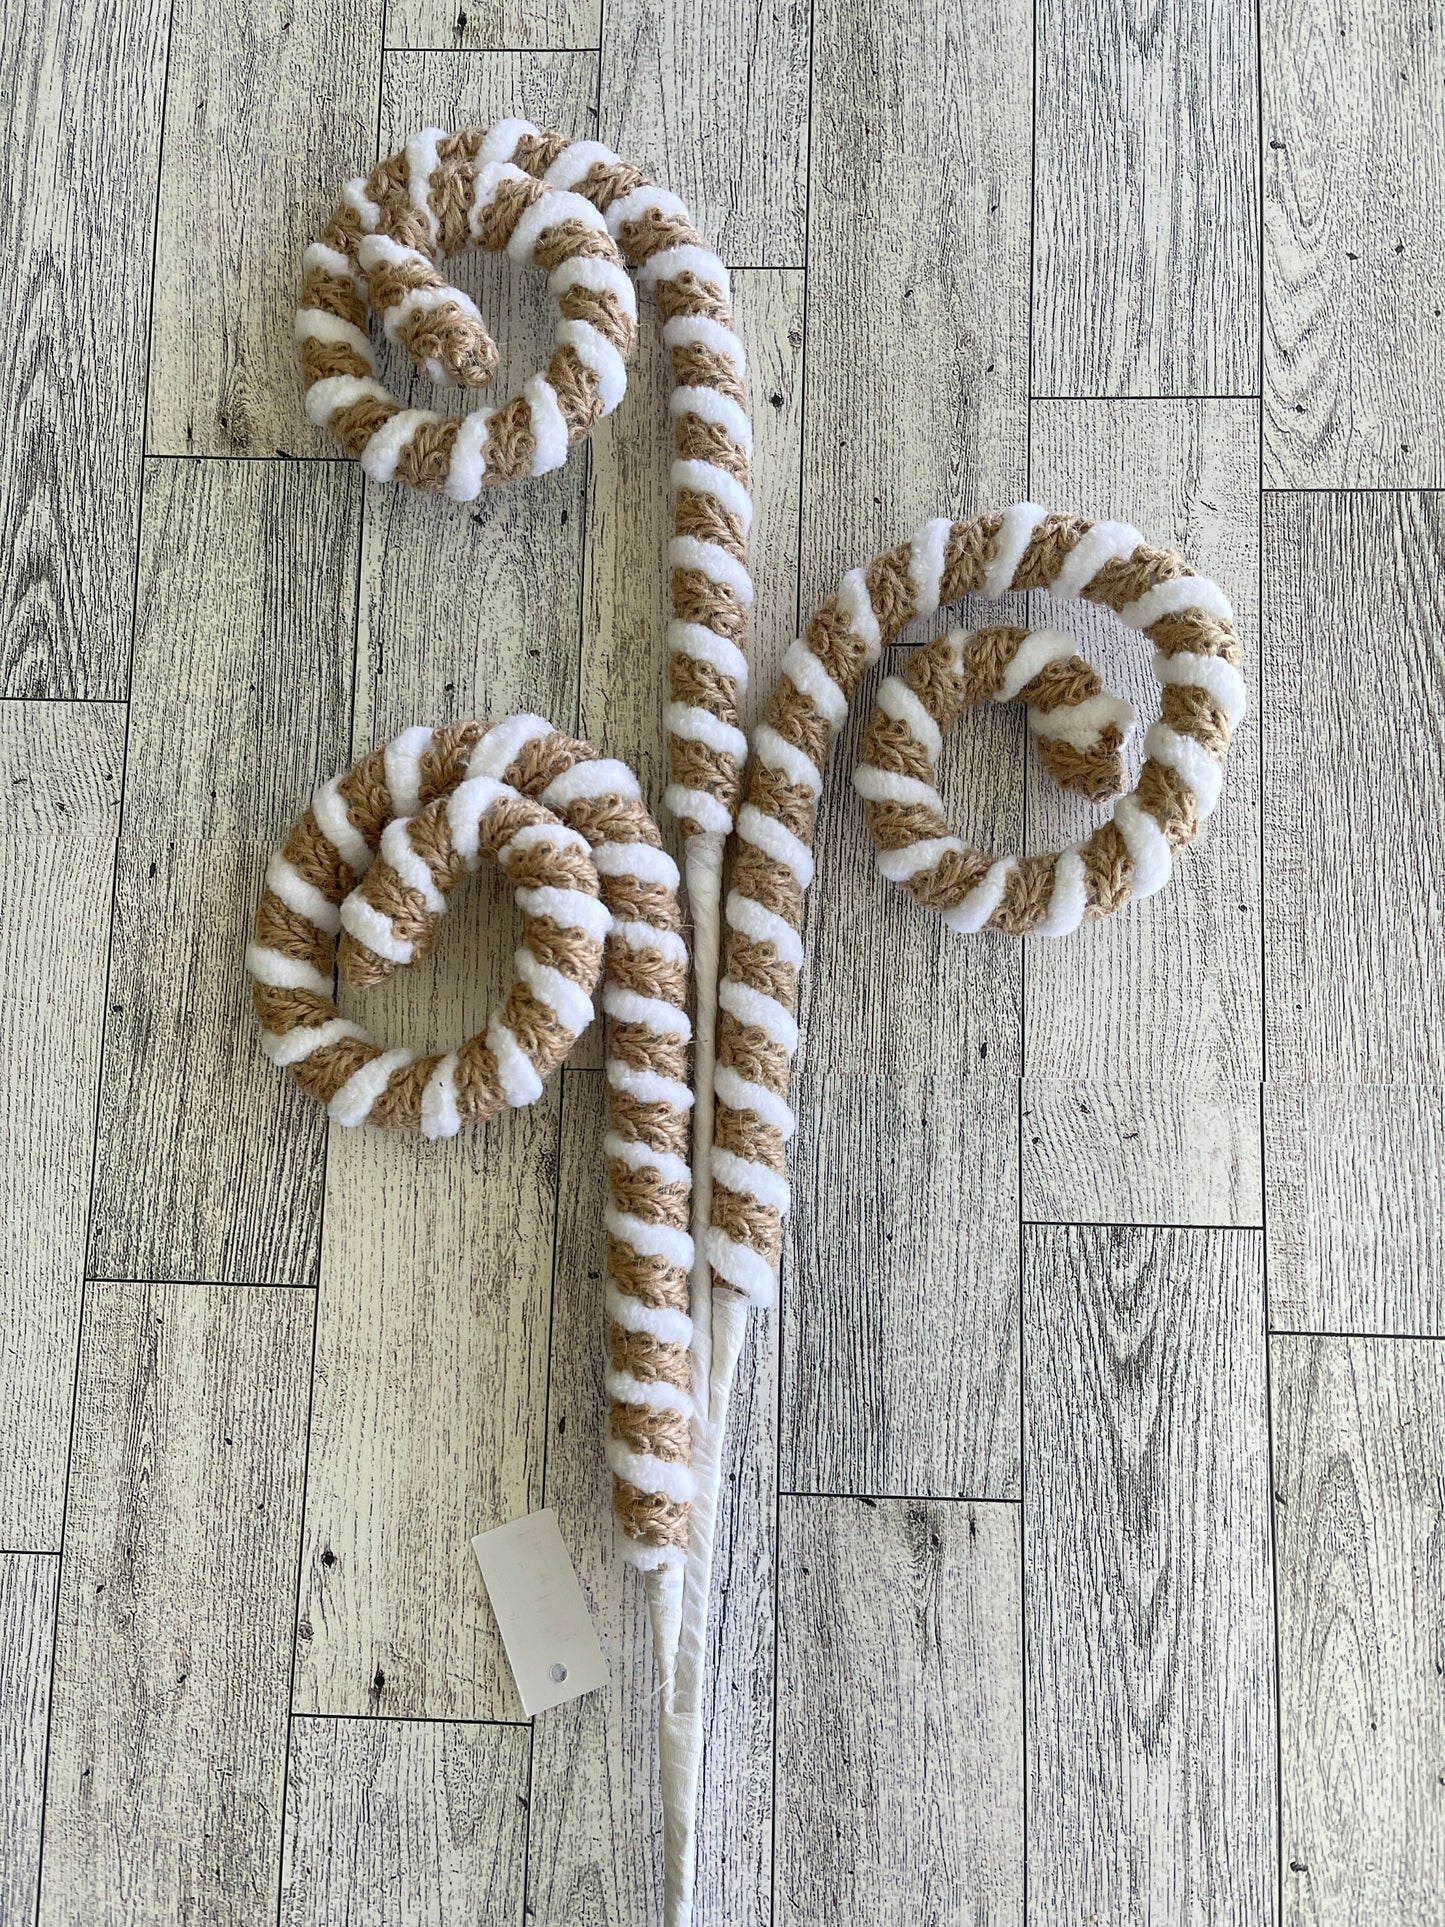 Jute Beige and White Curly Spray, Wreath Embellishment, Christmas Tree Decor, Home Decor, craft supply, Tiered Tray Decor, Boho Curls